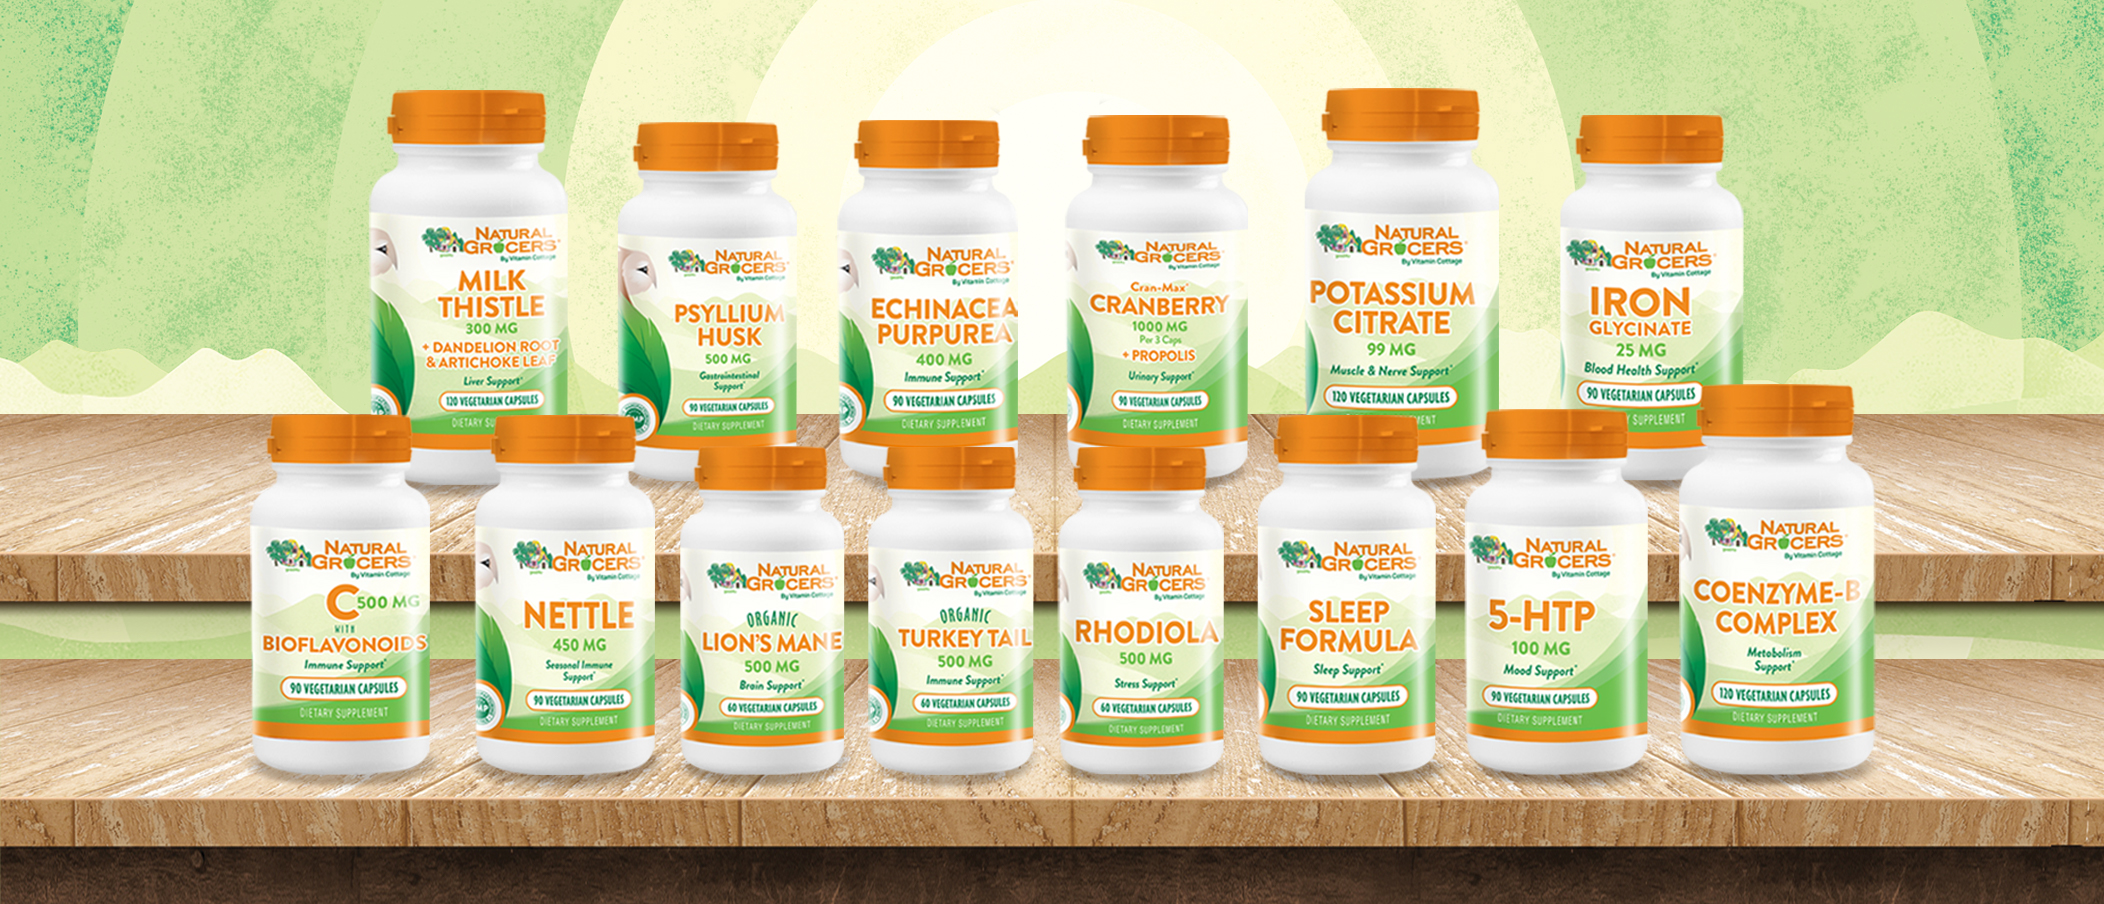 Natural Grocers Brand Products - Vitamins & Supplements